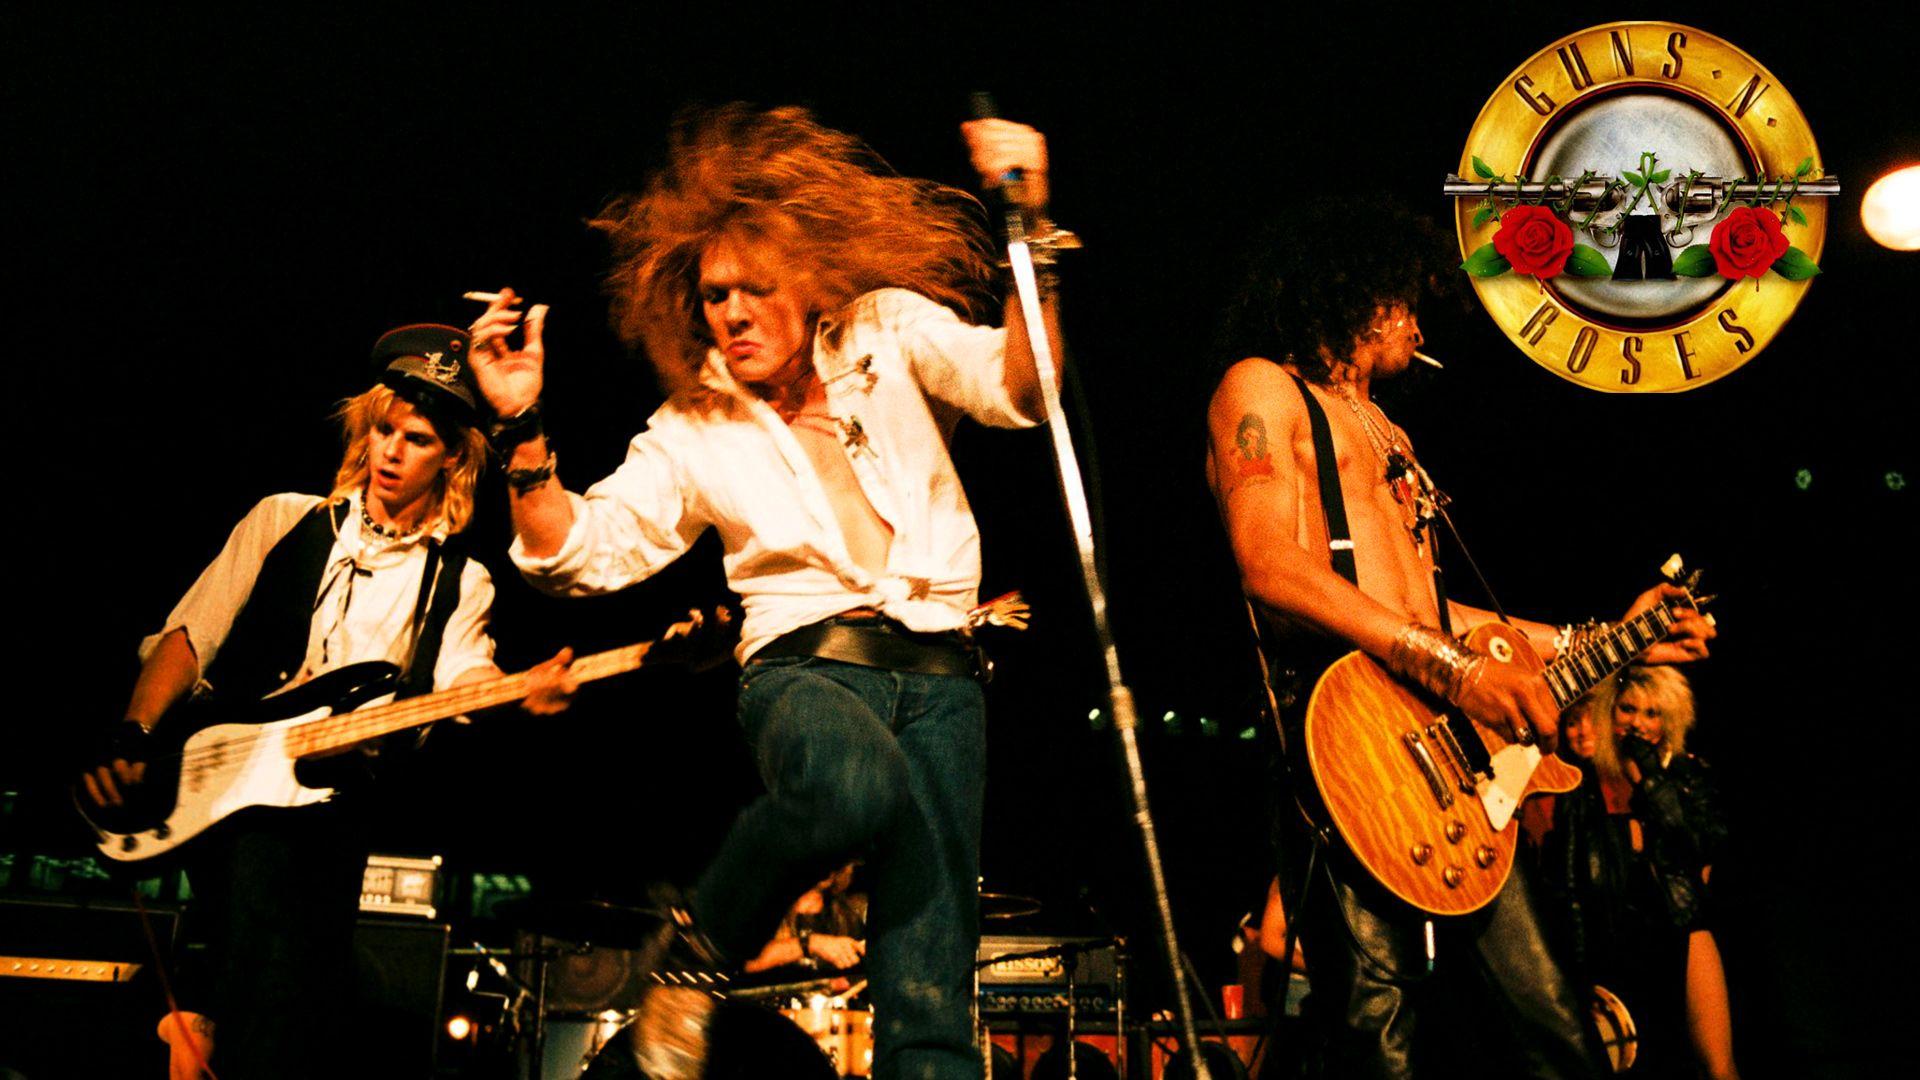 An Appetite For Destruction: The Enigma That is Guns N' Roses